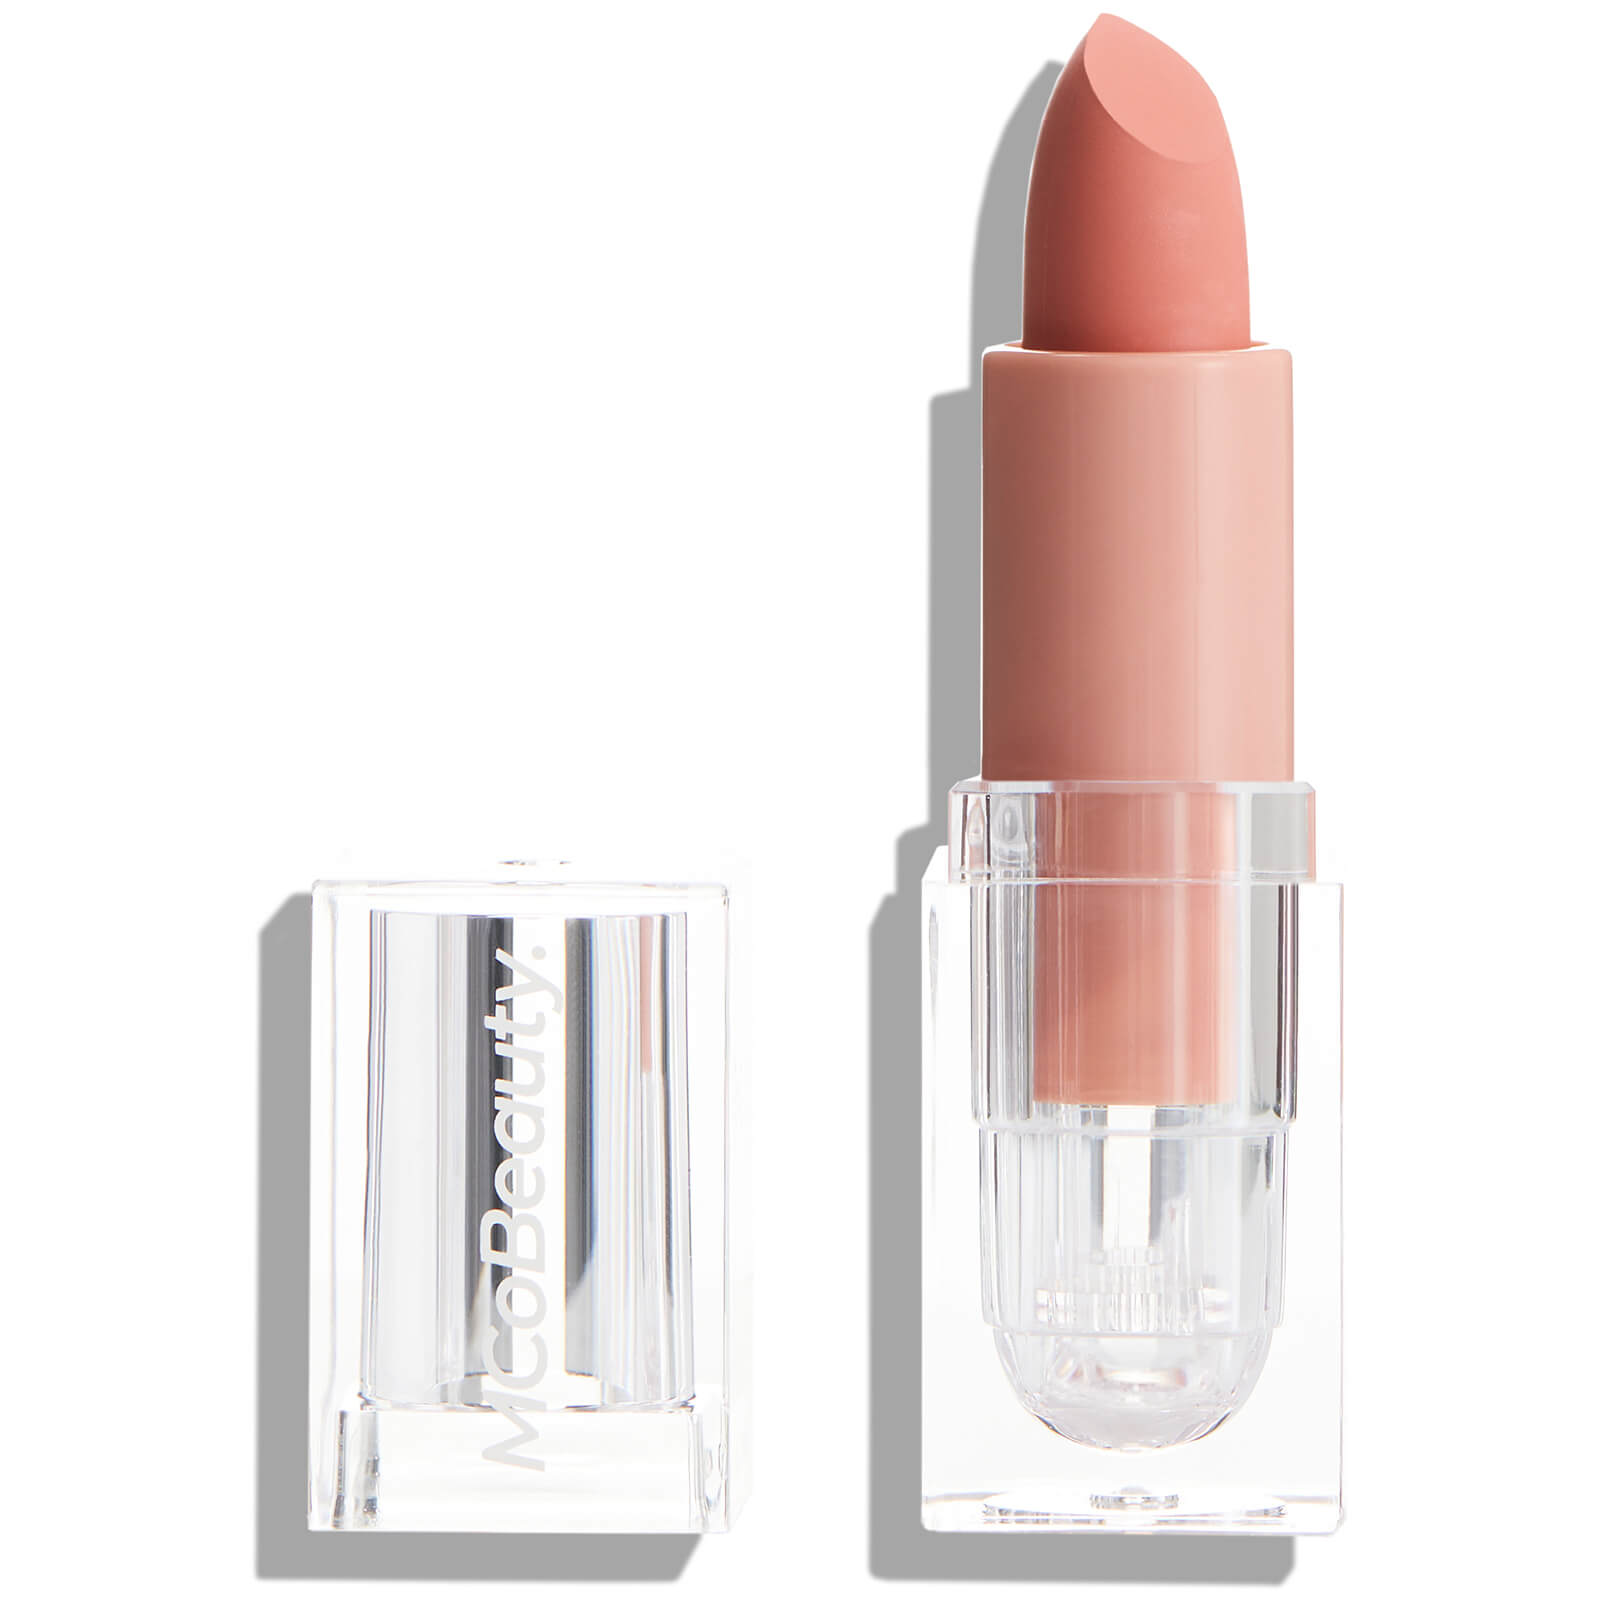 MCoBeauty Crème Matte Lipstick 3g (Various Shades) - Nearly Nude